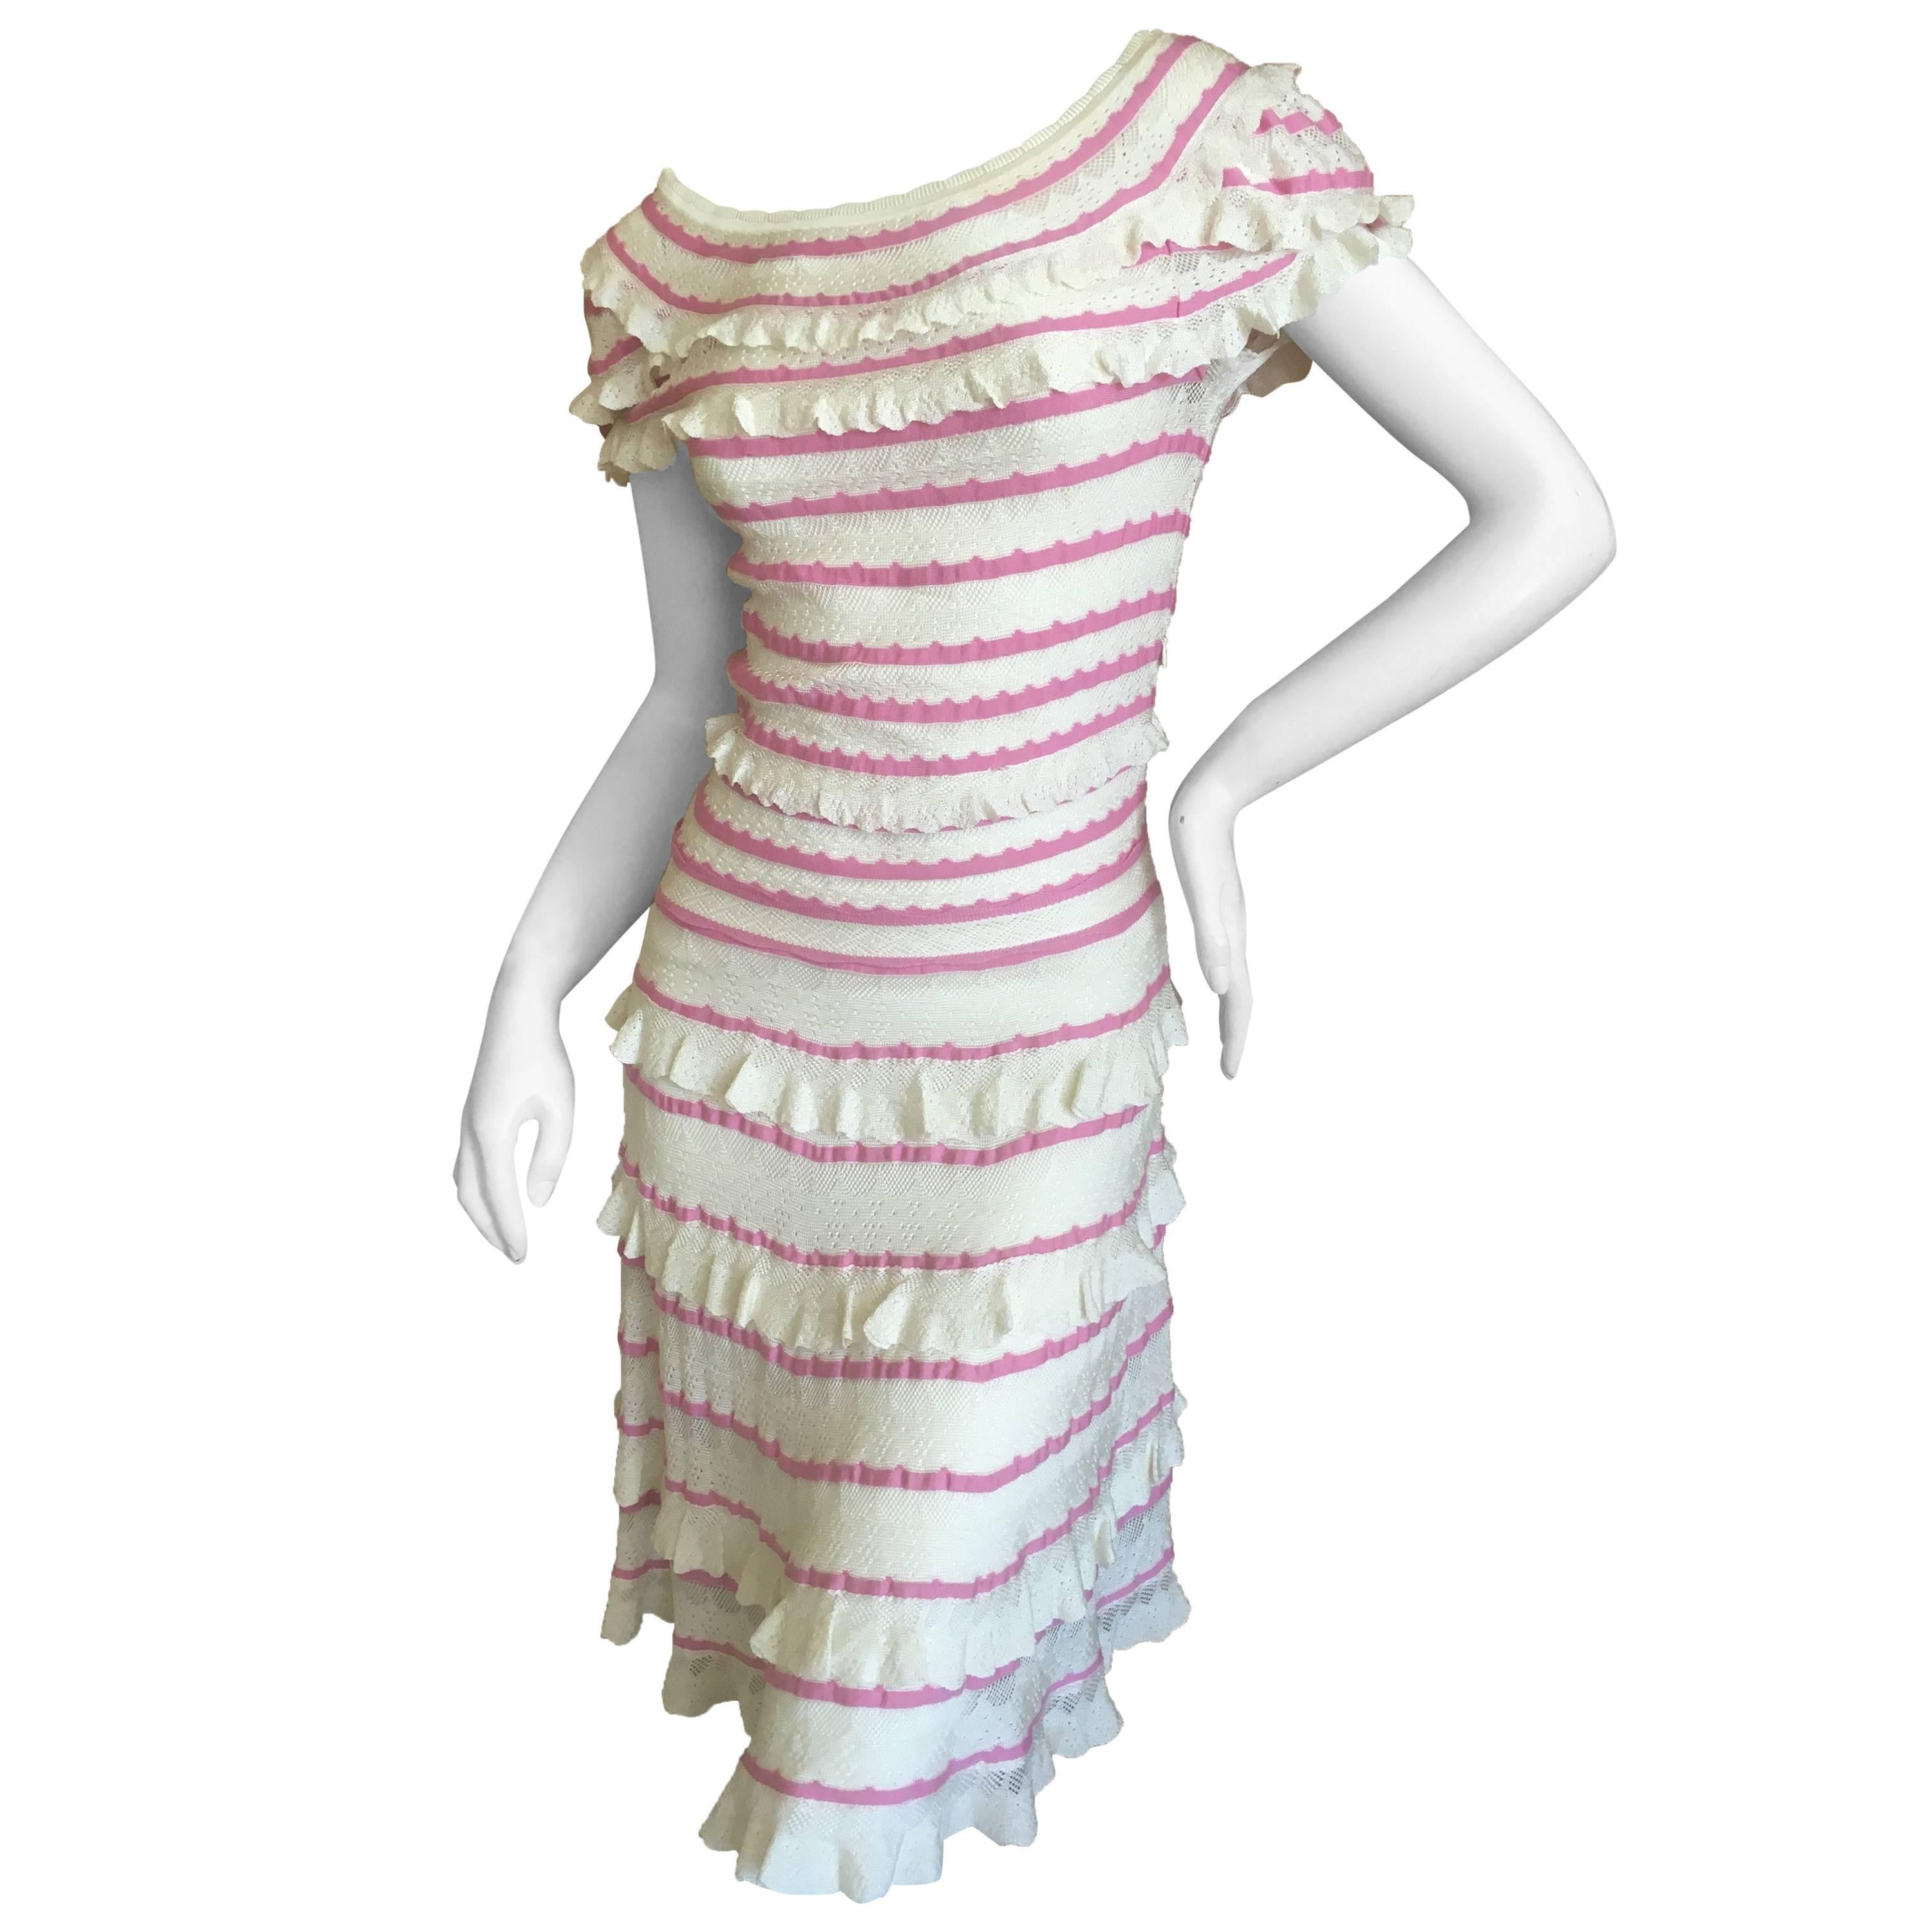 Christian Dior by John Galliano Romantic Ruffled Pink and Cream Knit Dress For Sale